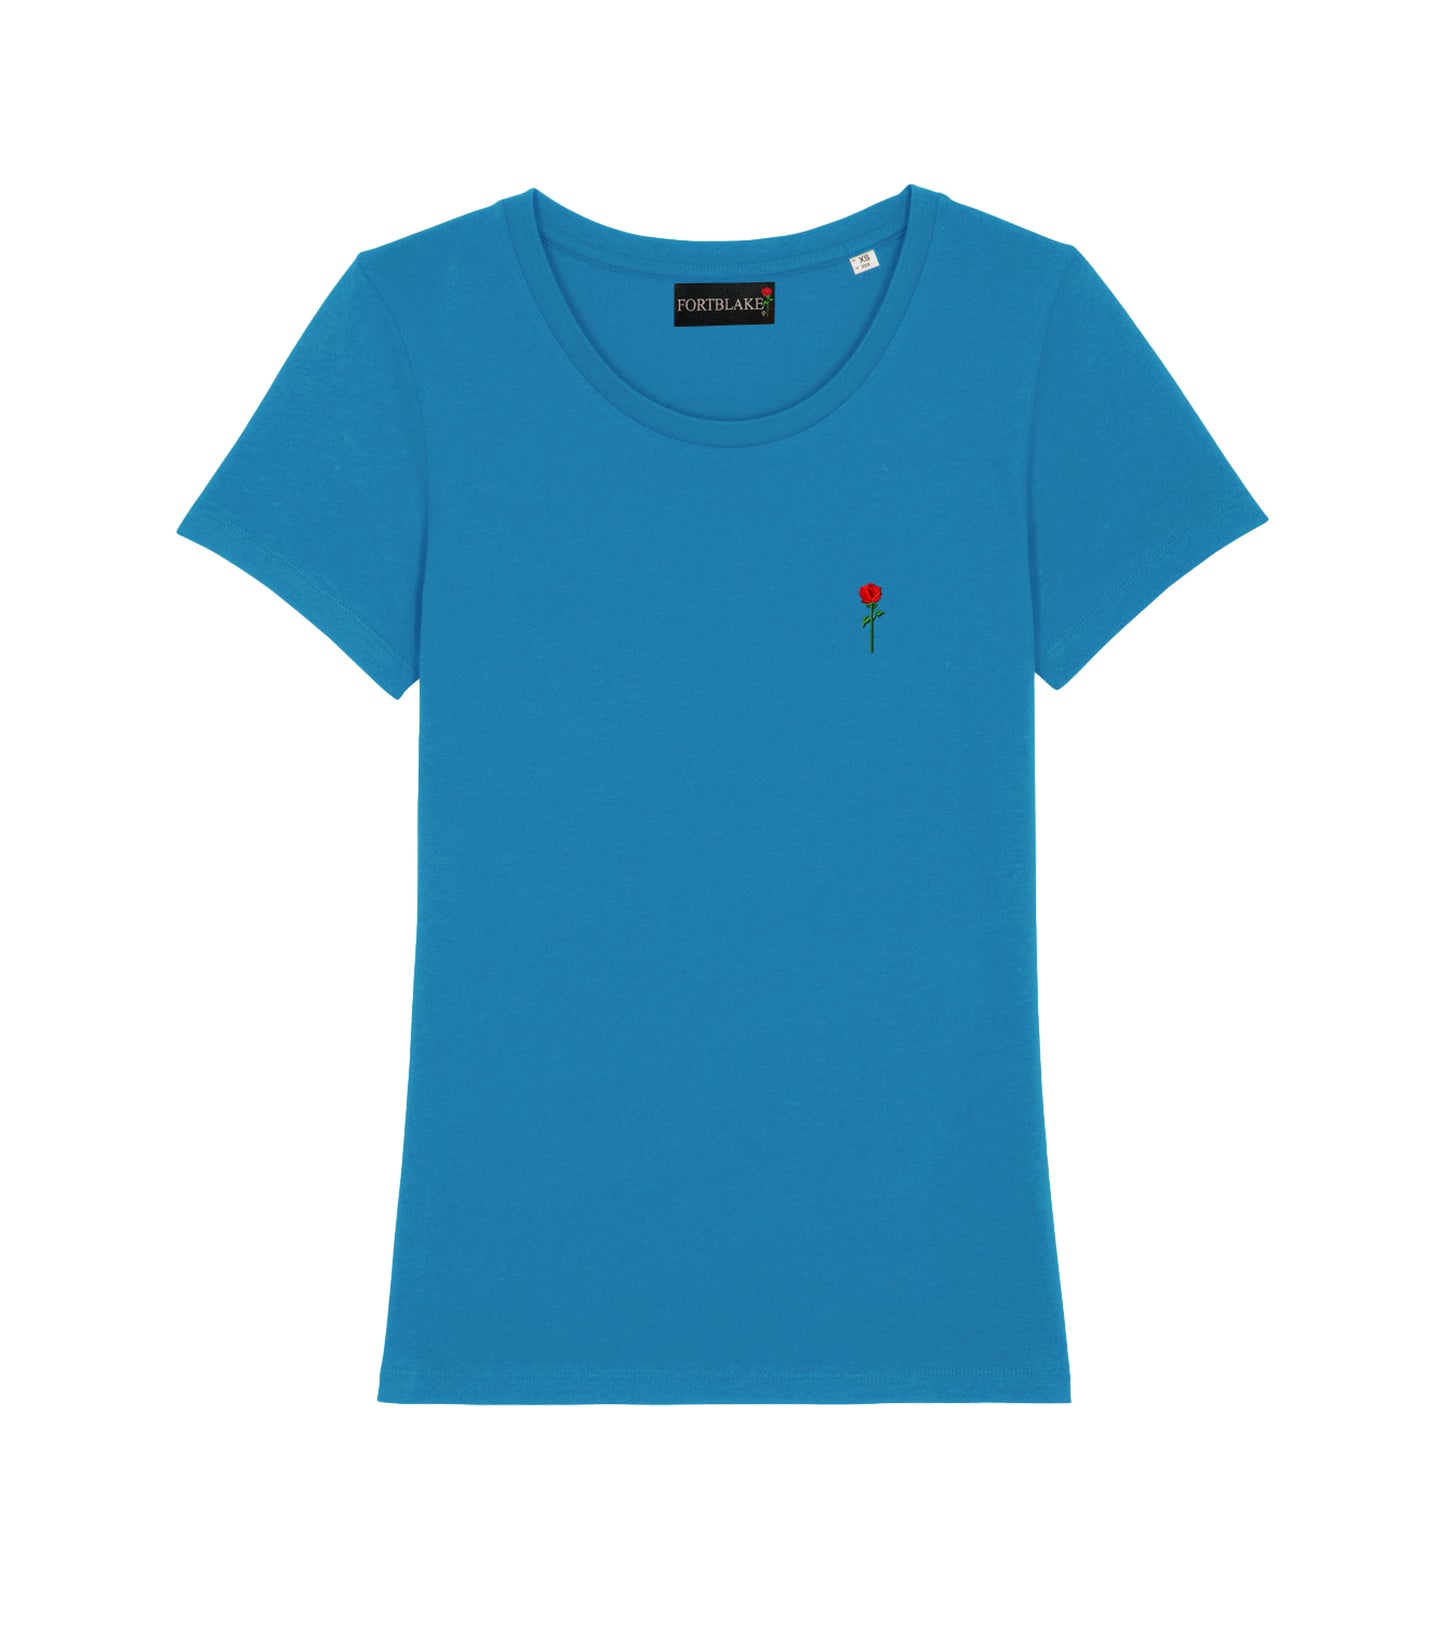 FORTBLAKE WOMAN CLASSIC TURQUOISE T-SHIRT